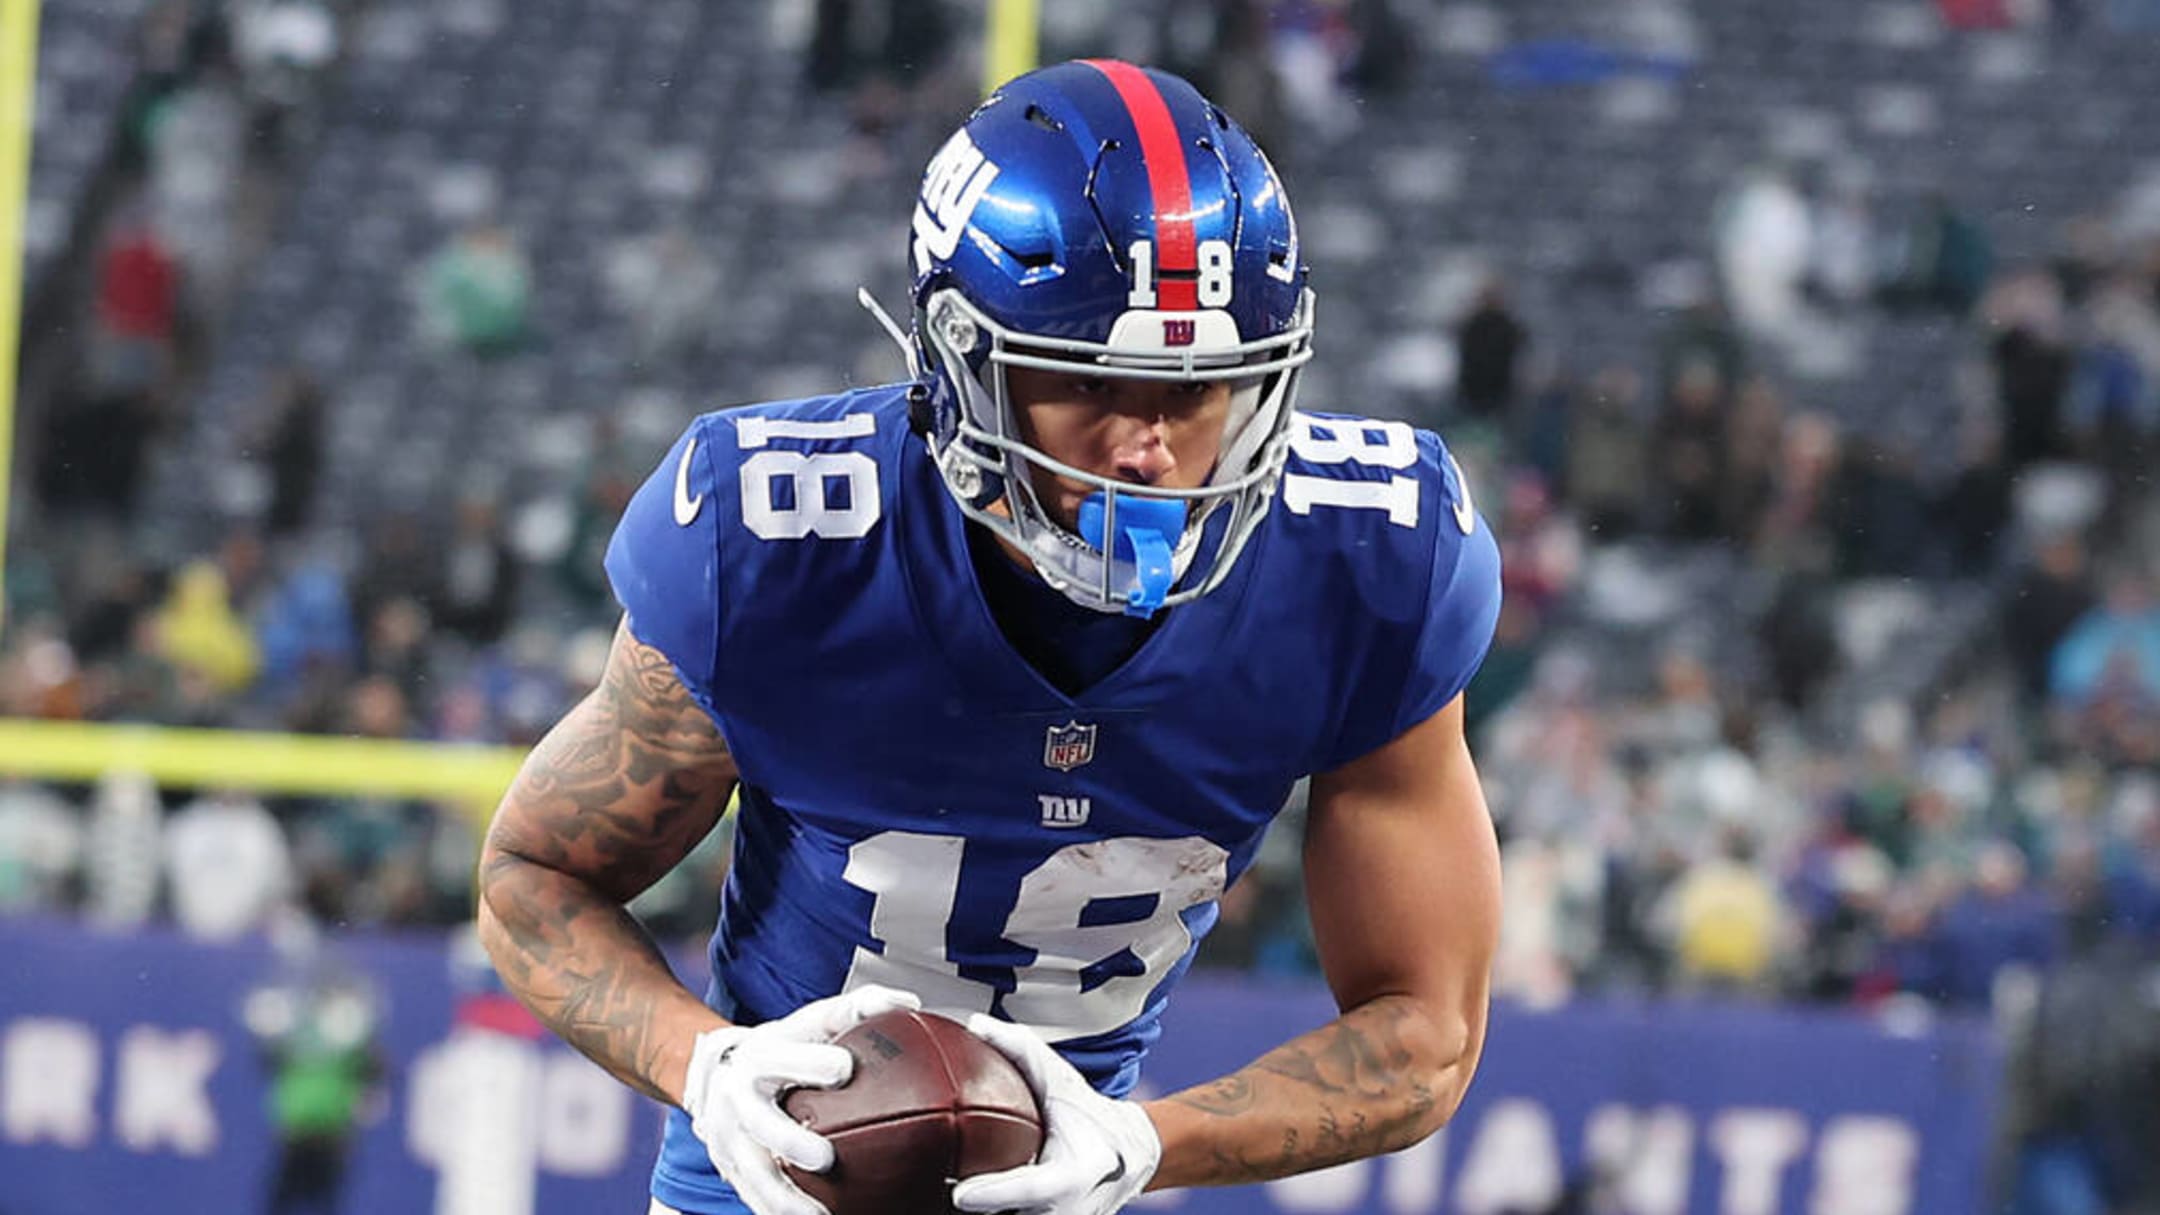 ESPN analysts: Giants have 'massive' question marks at WR